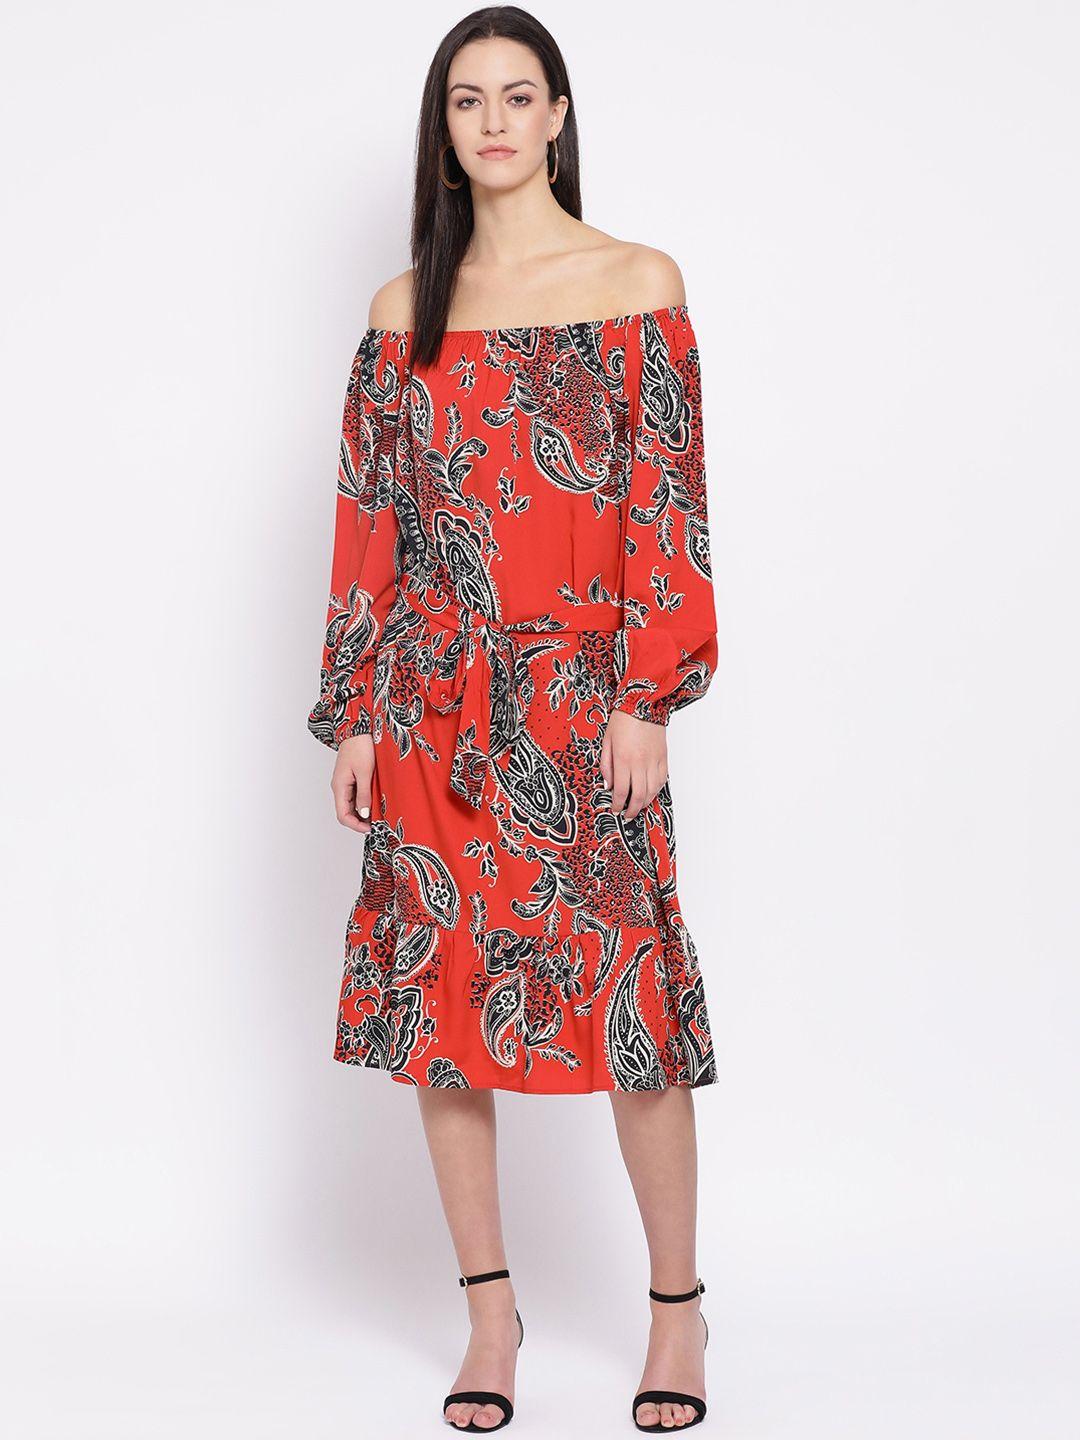 oxolloxo women red floral printed fit and flare dress